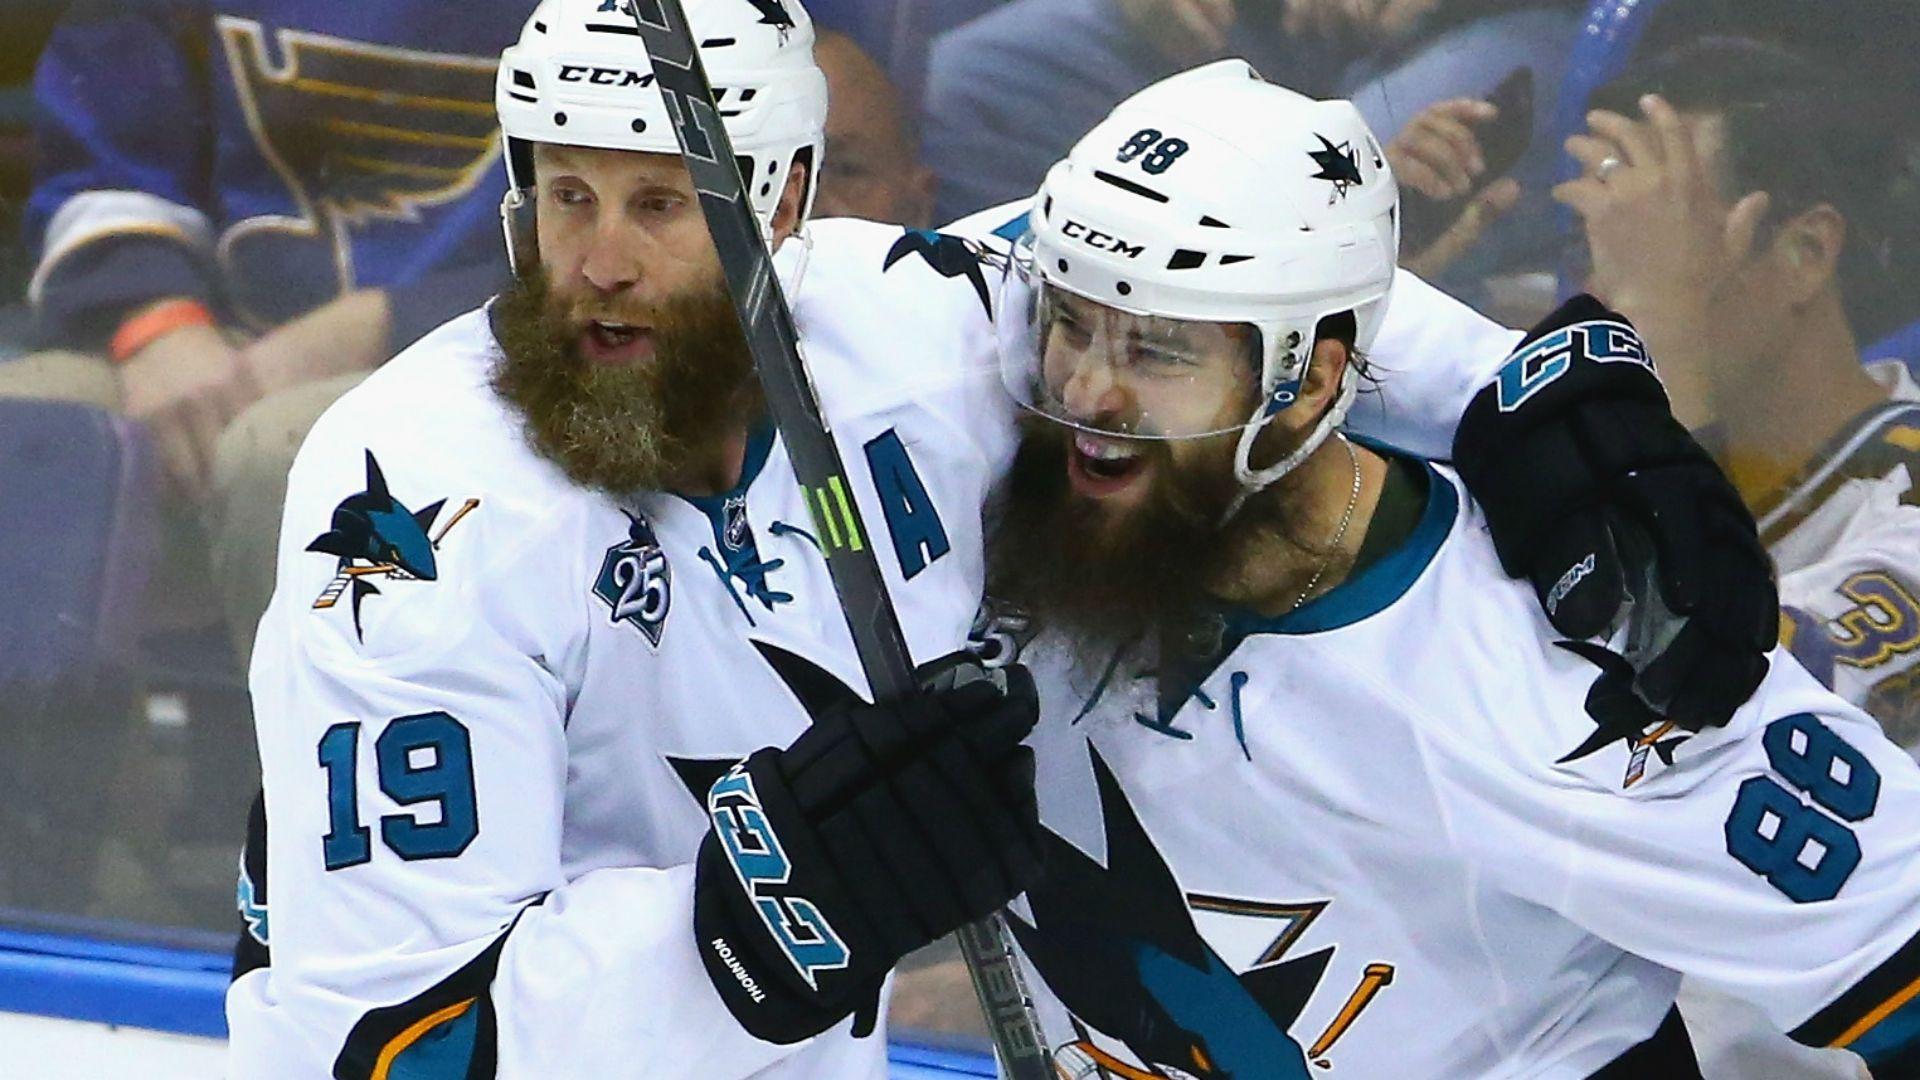 Stanley Cup playoffs three stars Brent Burns doubles up as Sharks